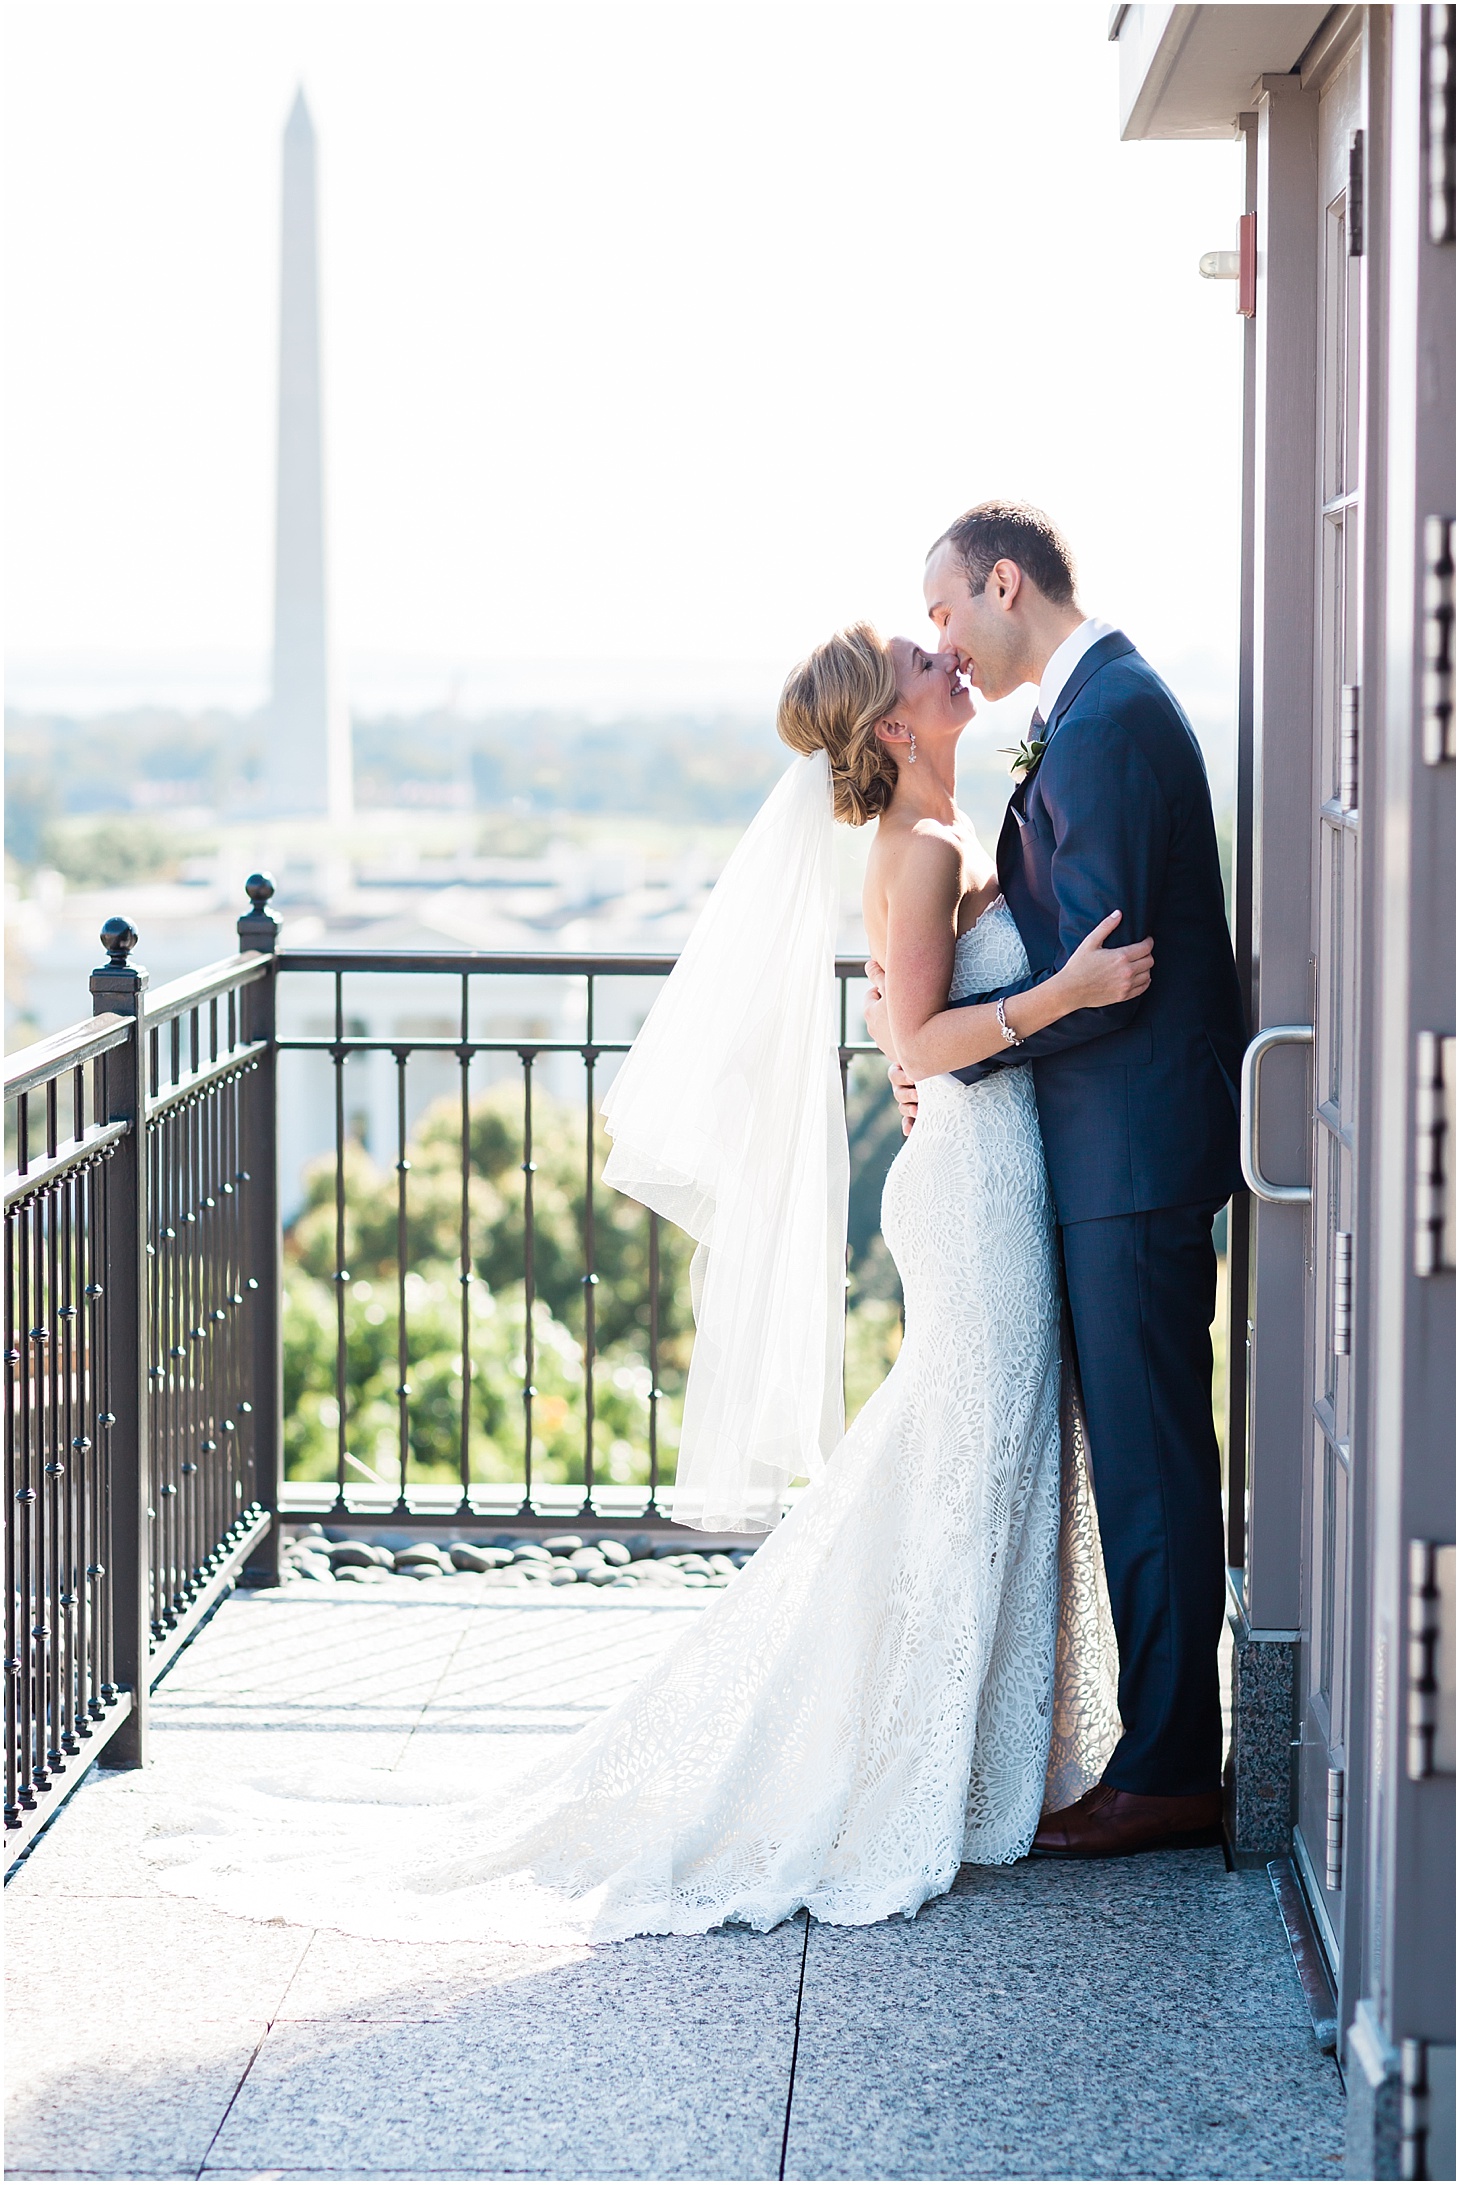 Wedding Portraits at The Top of the Hay, Industrial-Chic Wedding at Long View Gallery in DC, Sarah Bradshaw Photography, DC Wedding Photographer